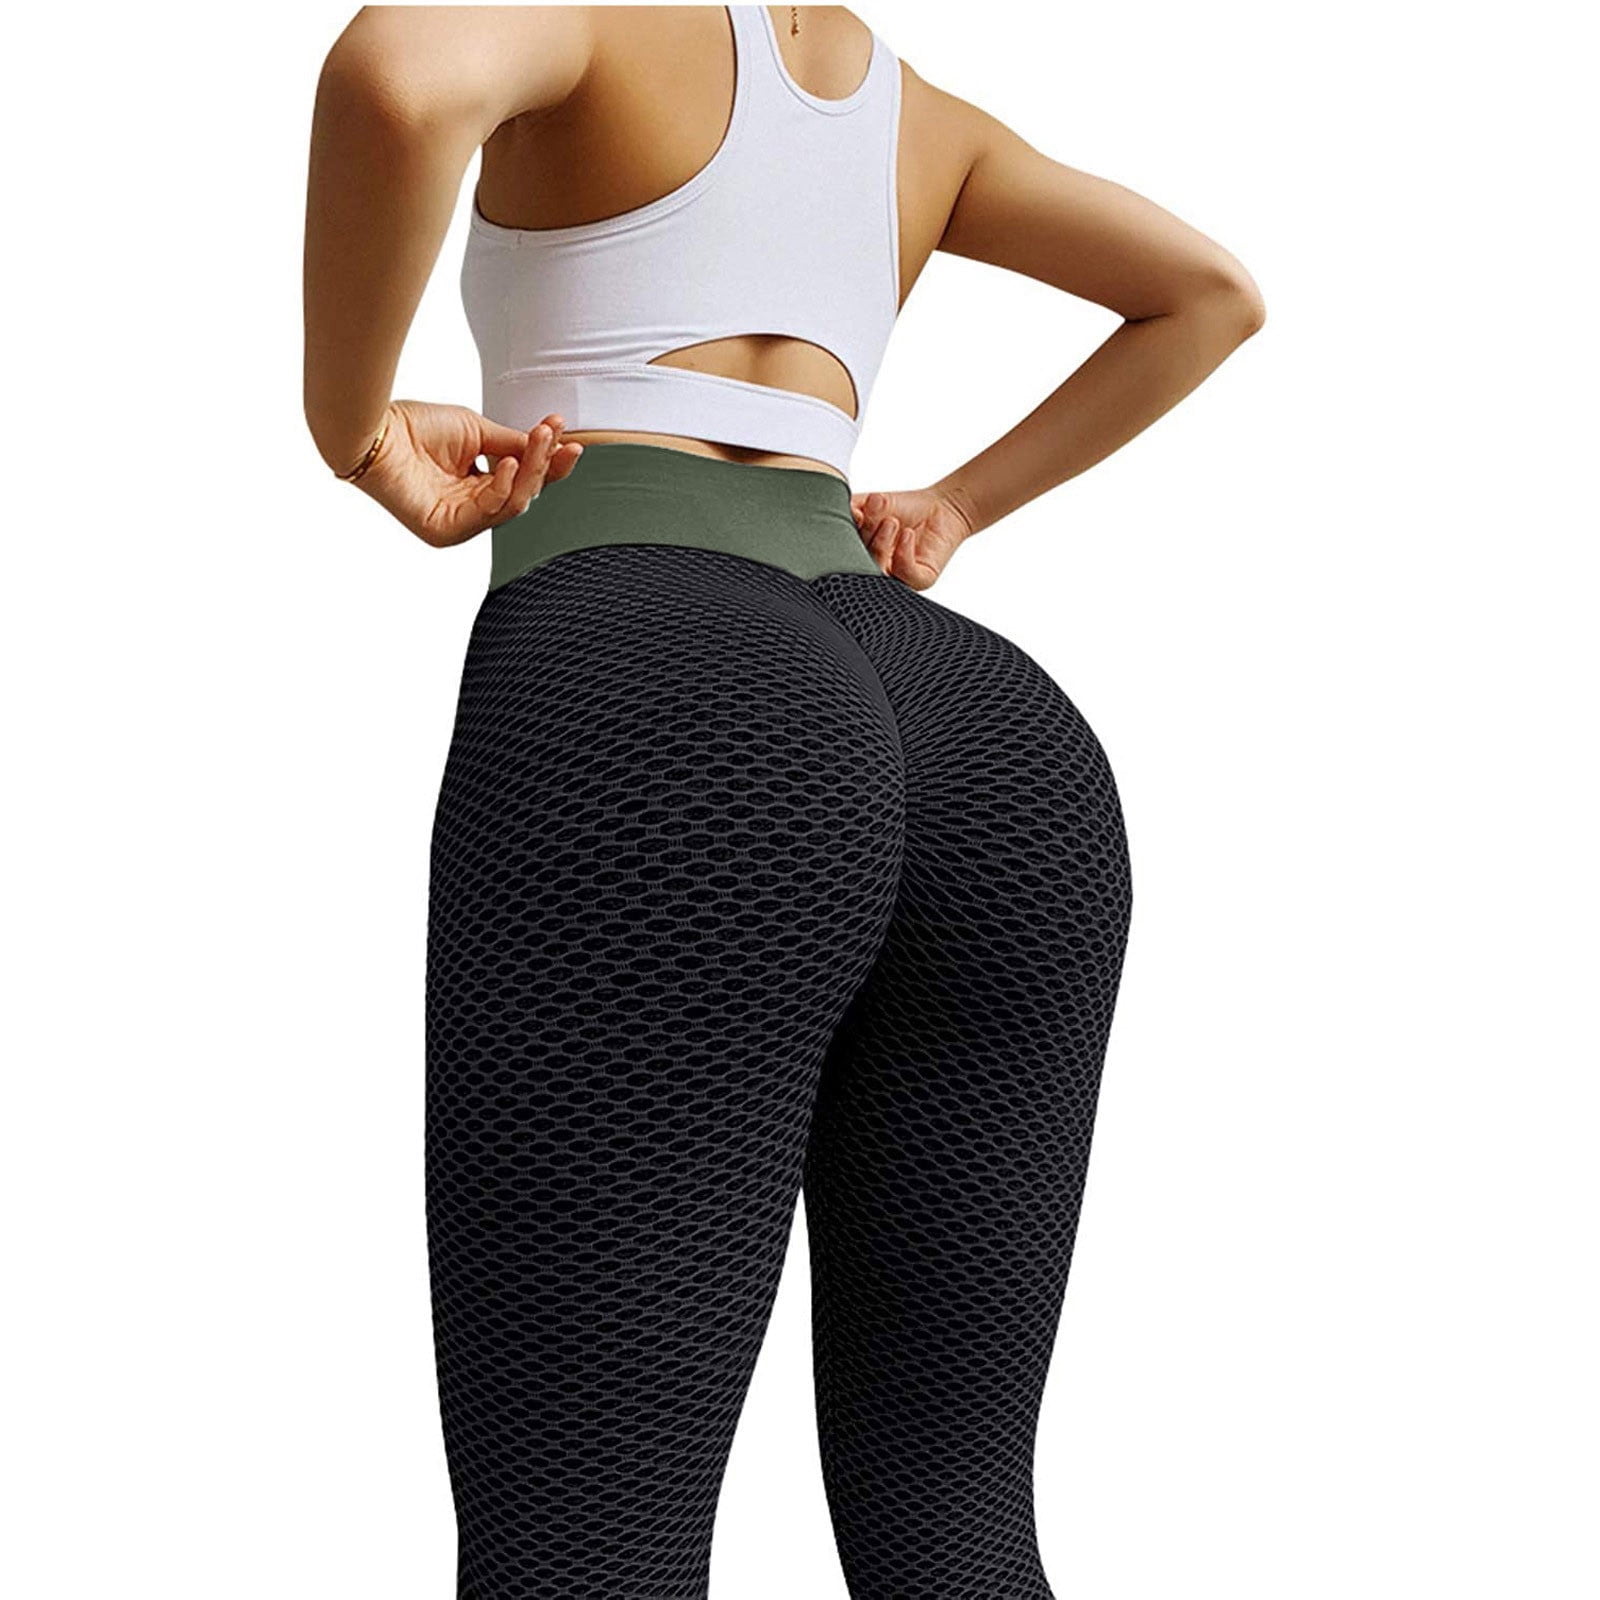 HAPIMO Sales Women's Yoga Pants High Waist Camouflage Print Pocket Workout  Pants Hip Lift Tights Stretch Athletic Slimming Running Yoga Leggings for  Women Pink L 